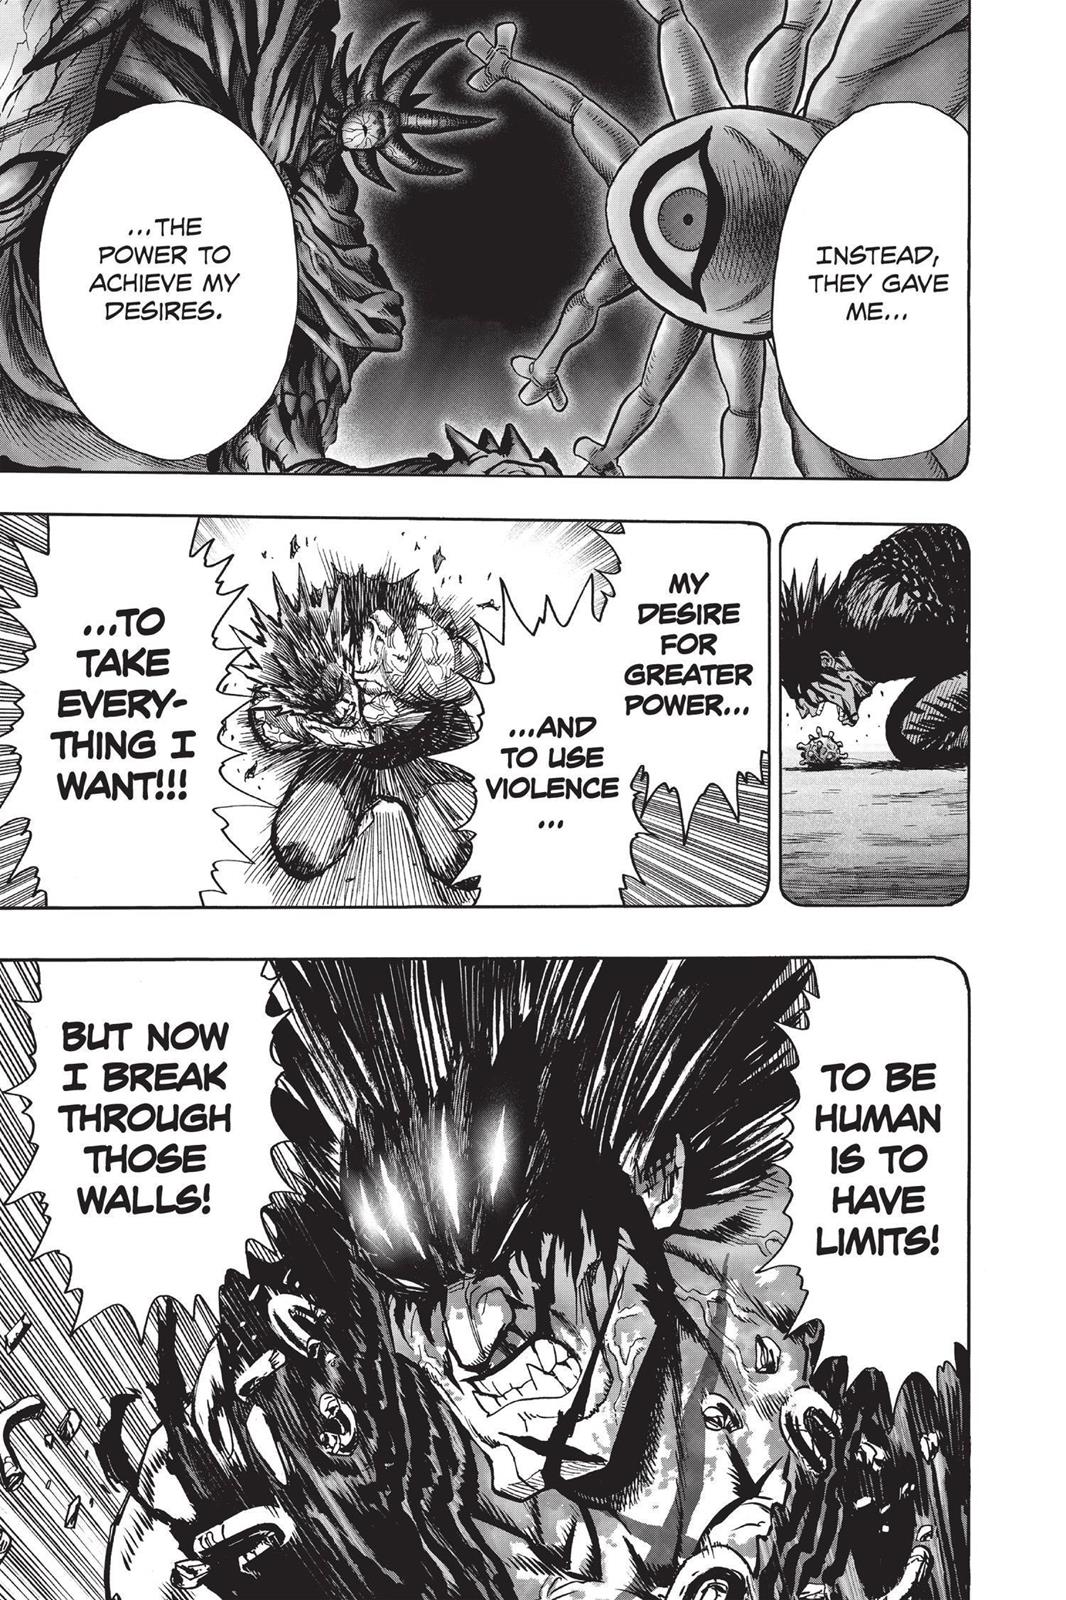 One-Punch Man, Punch 72 image 17